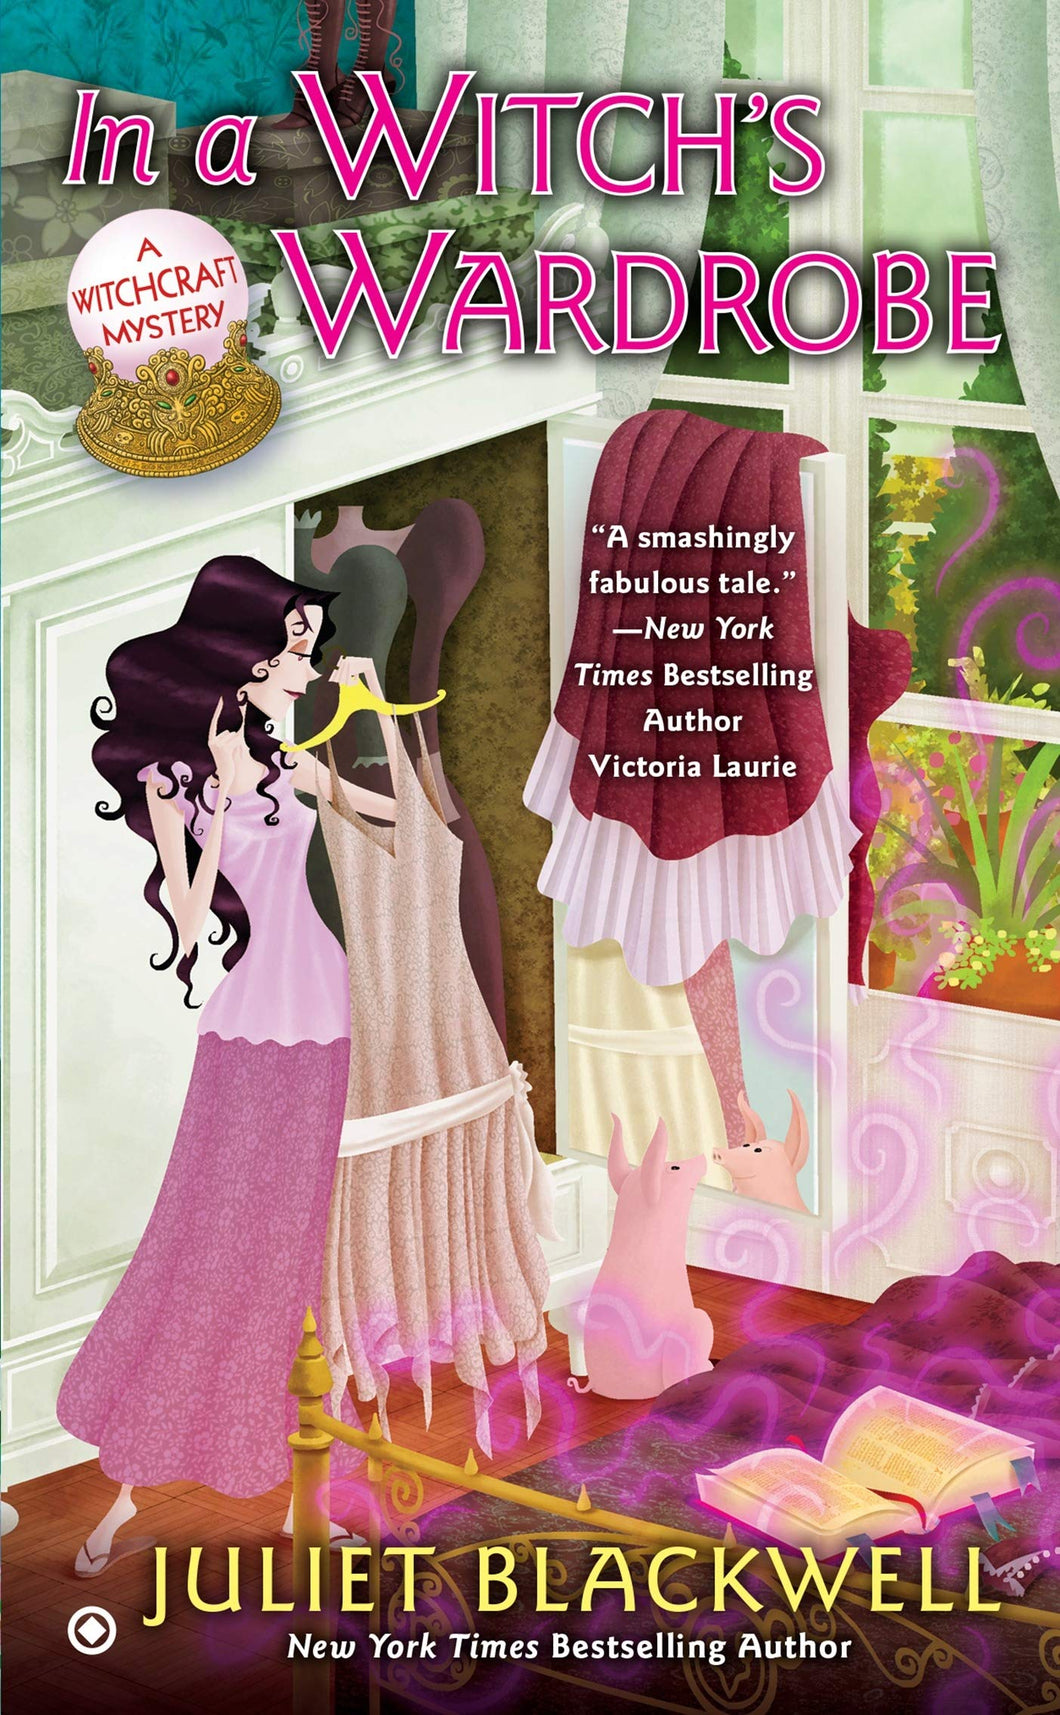 In A Witch's Wardrobe: A Witchcraft Mystery [Juliet Blackwell]